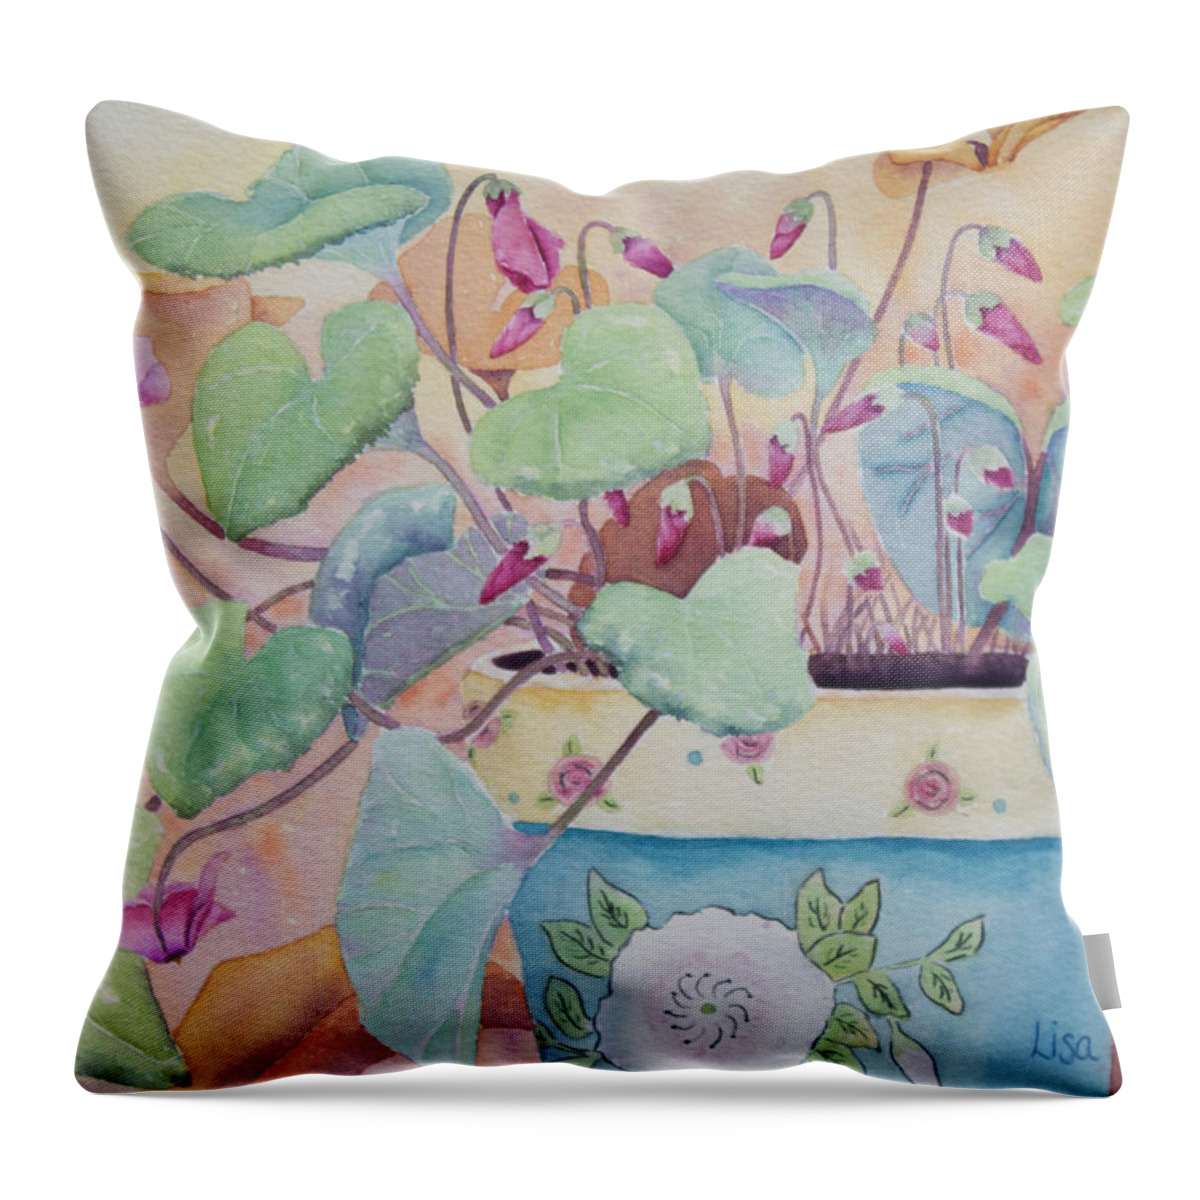 Giclee Throw Pillow featuring the painting Pink and Amber by Lisa Vincent